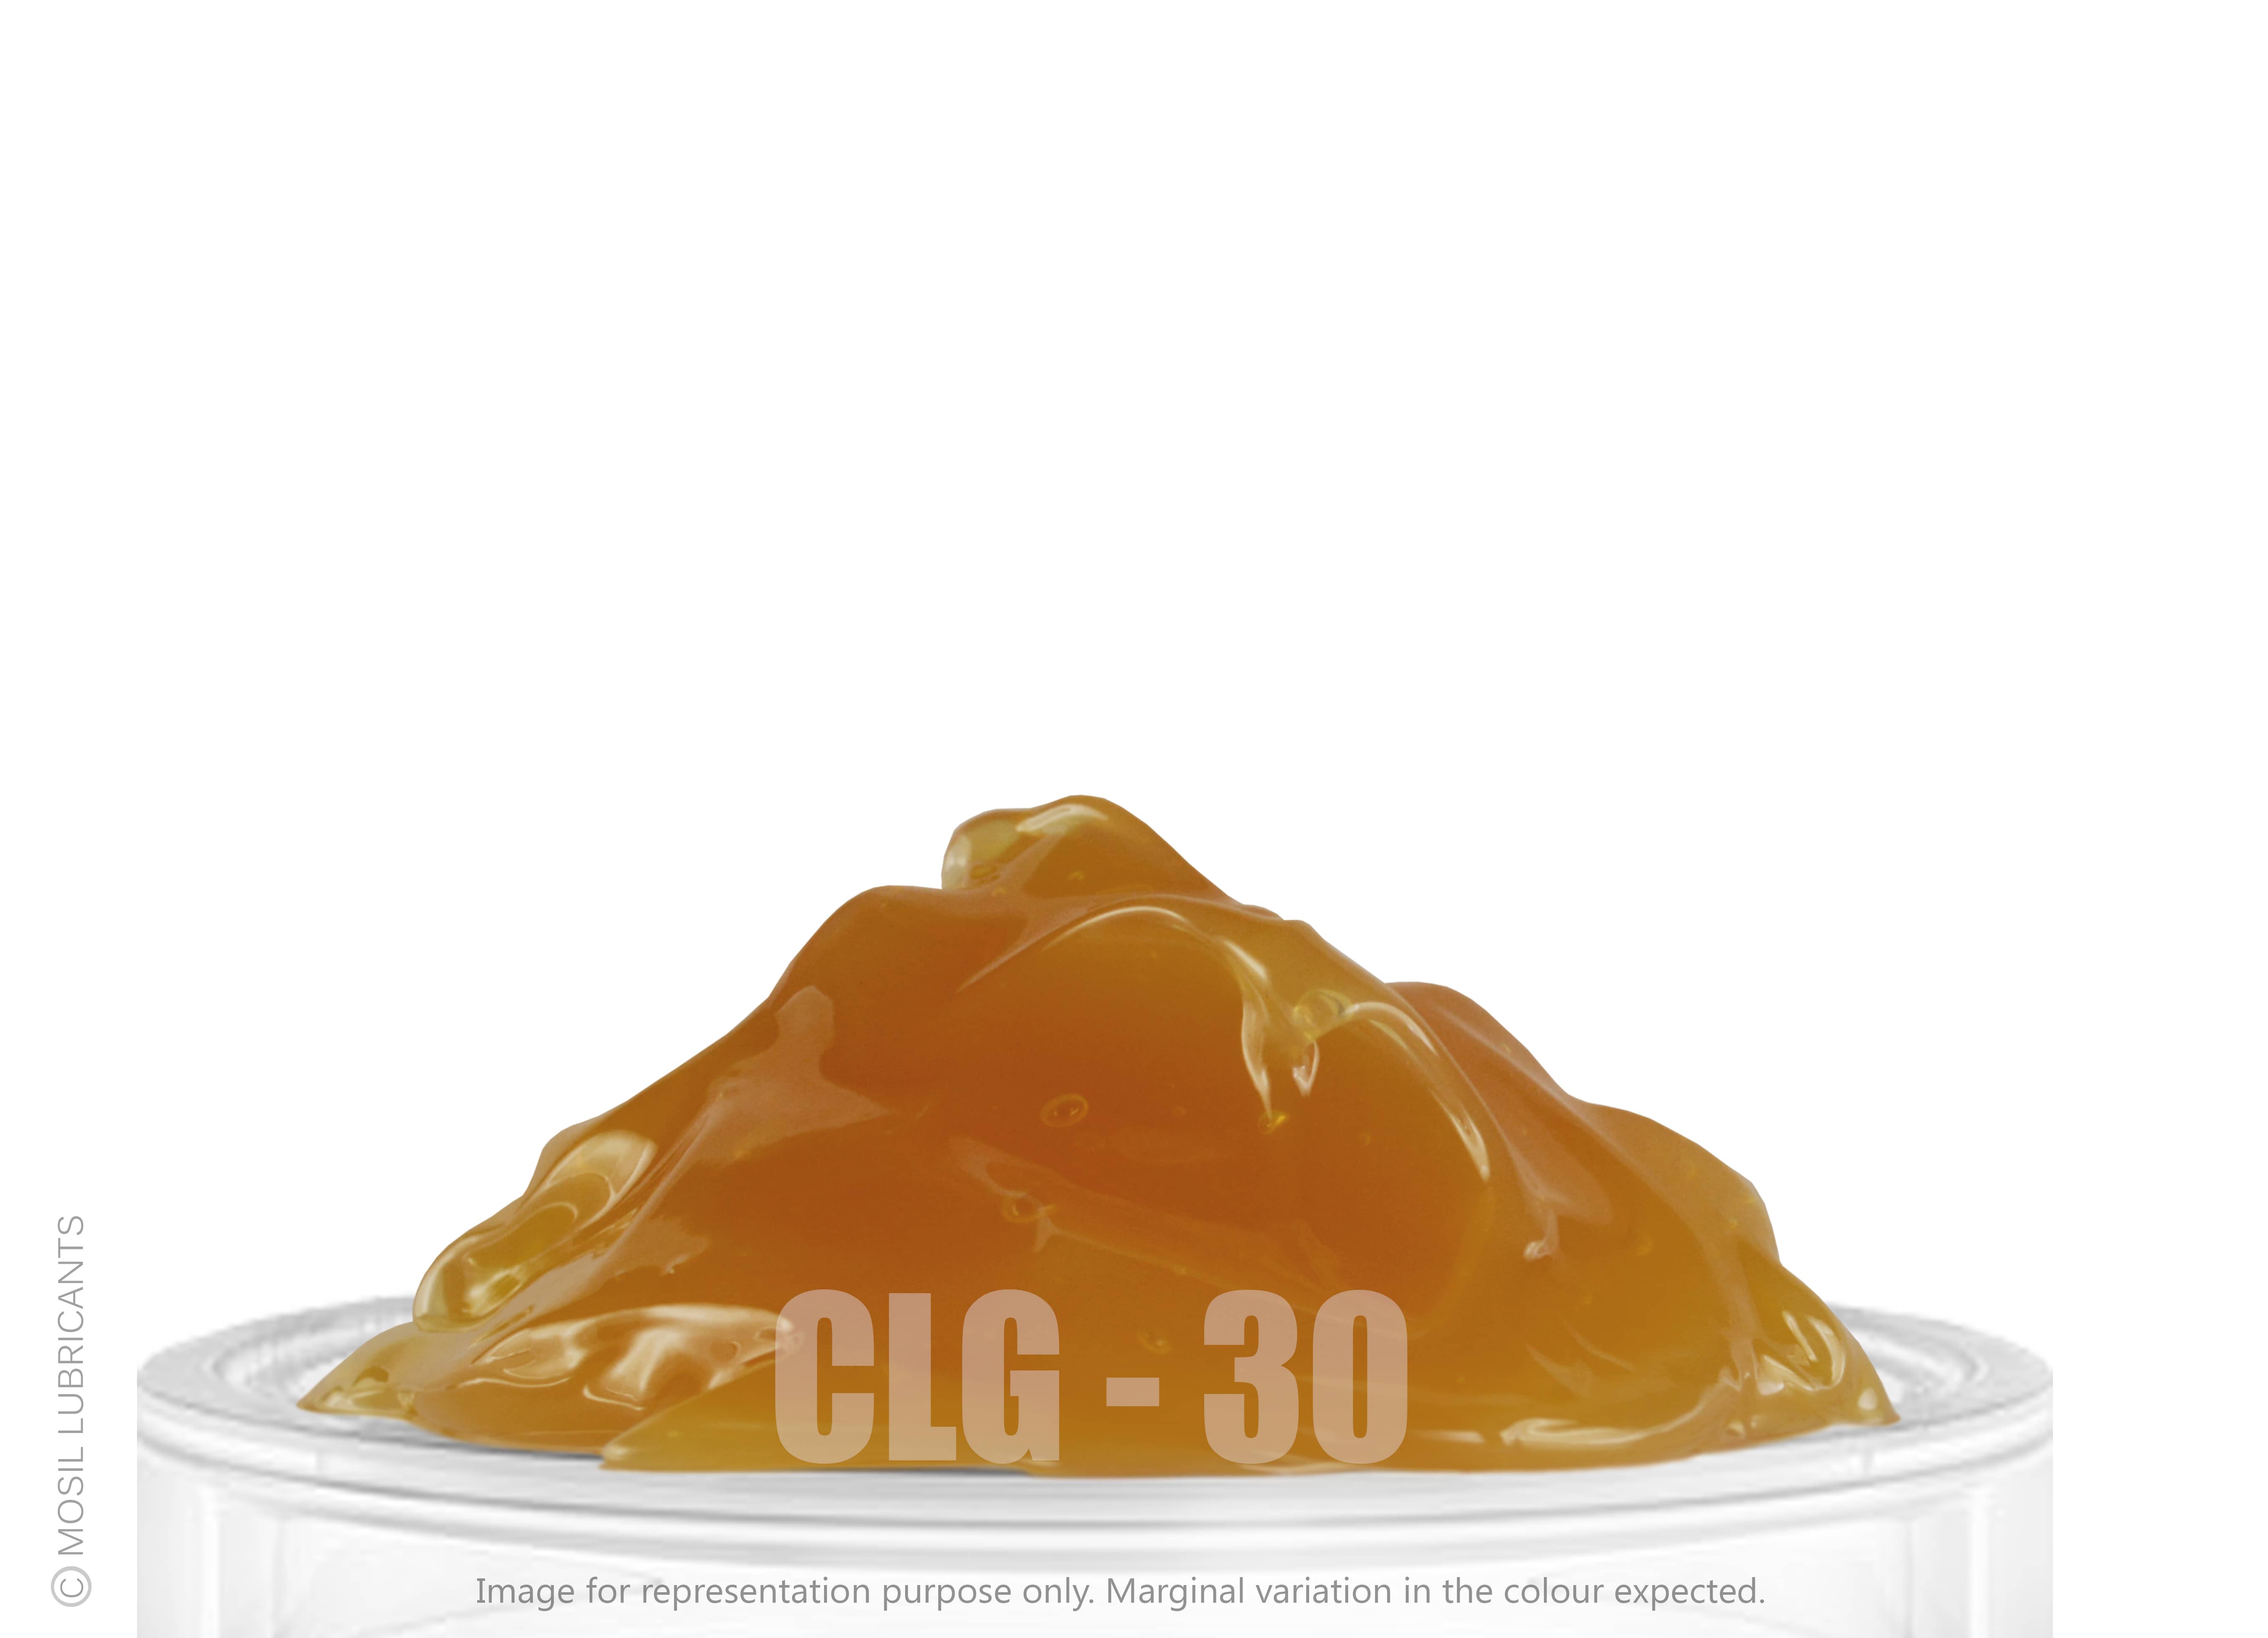 CLG - 30 | Fluid EP Grease for Plain & Antifriction Bearings